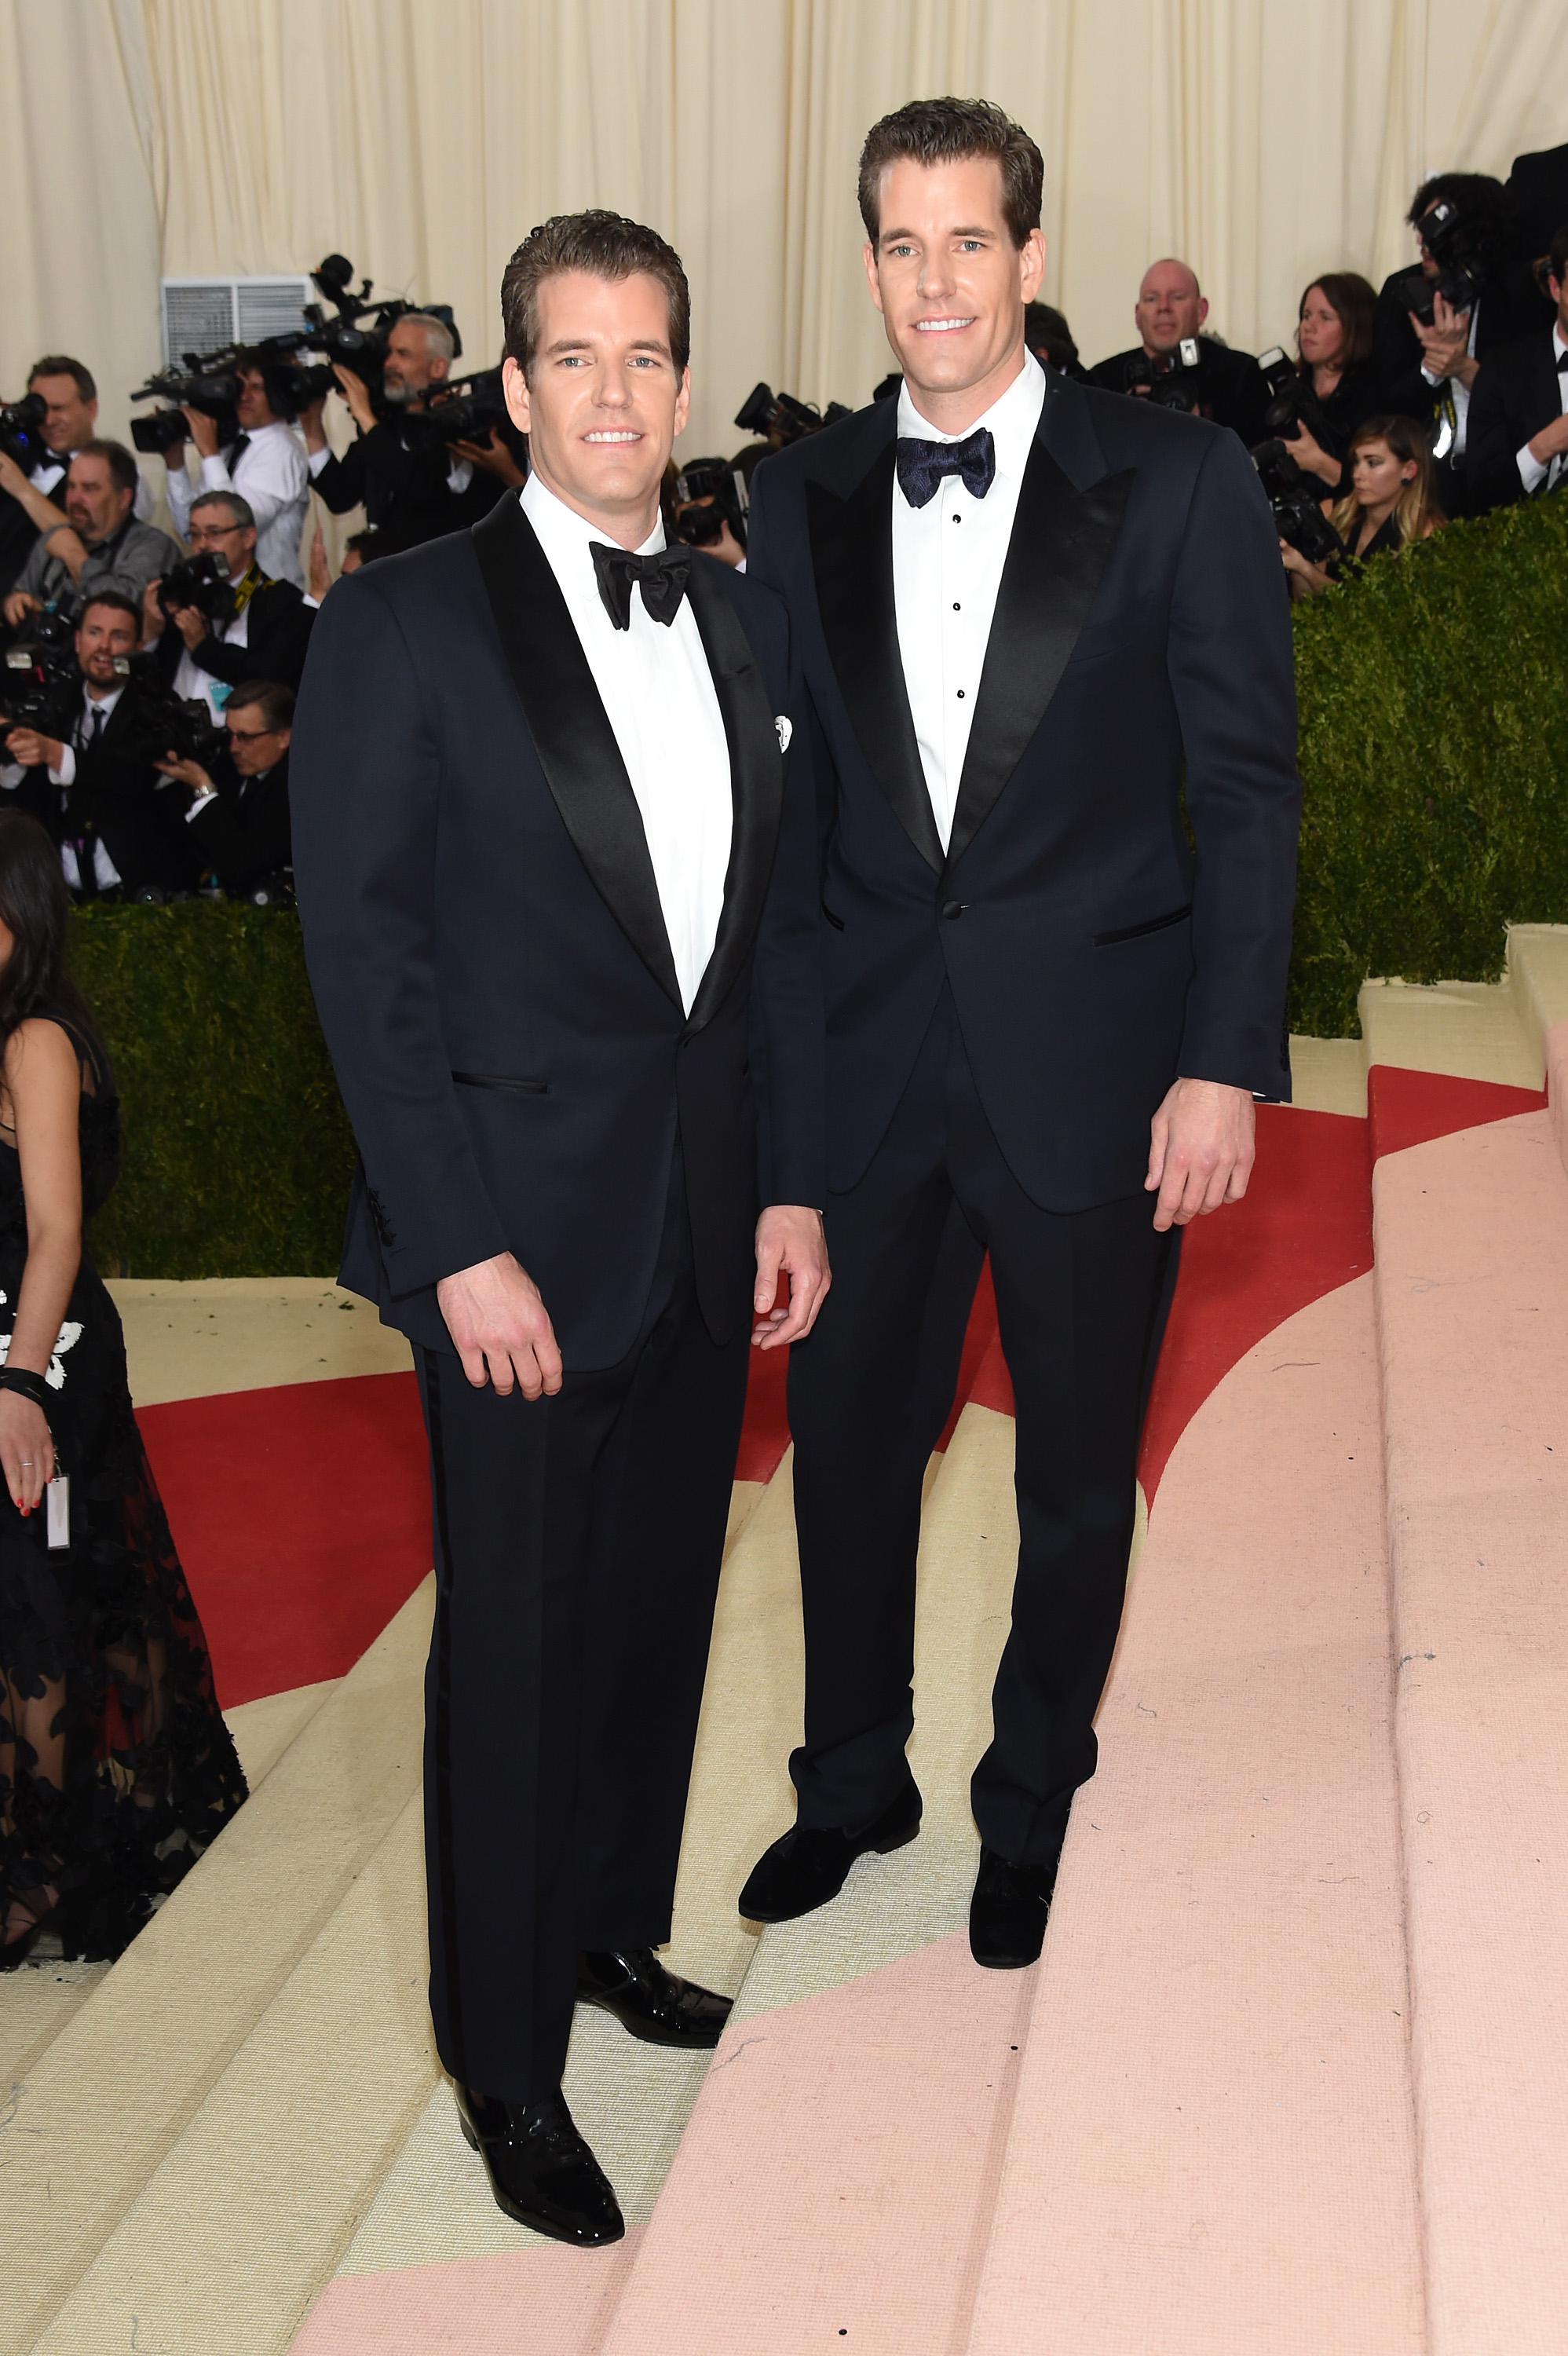 The Winklevoss twins attend "Manus x Machina: Fashion In An Age Of Technology" Costume Institute Gala at Metropolitan Museum of Art on May 2, 2016 in New York City.